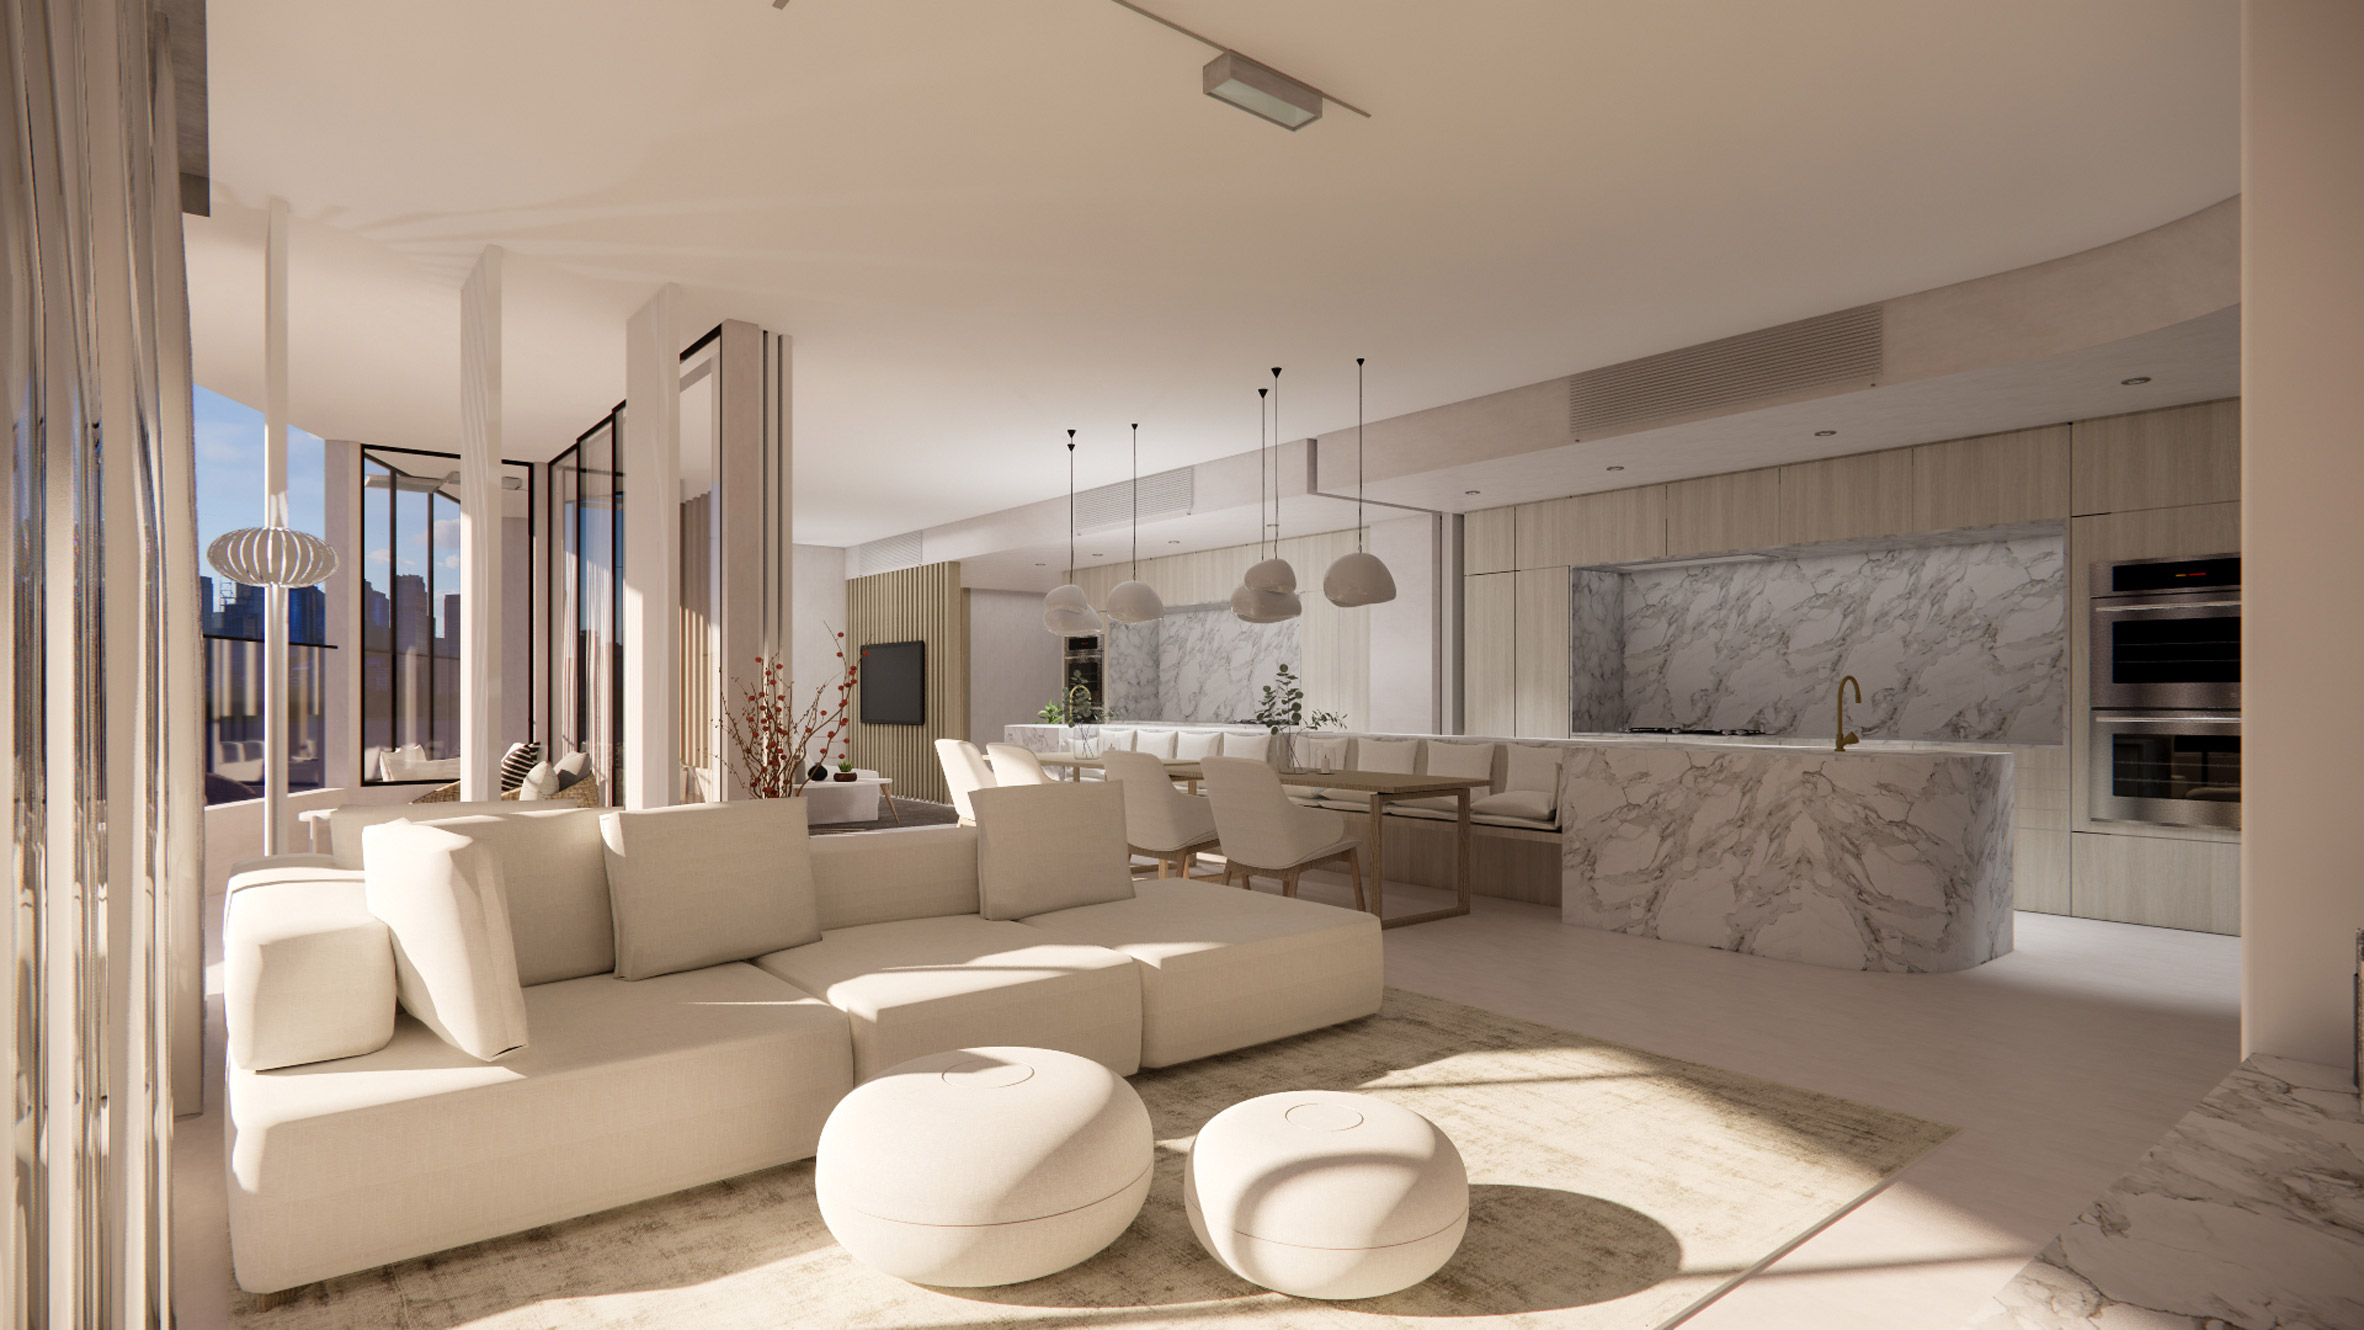 Rendering of apartment interior with cream and white finishes and furnishings